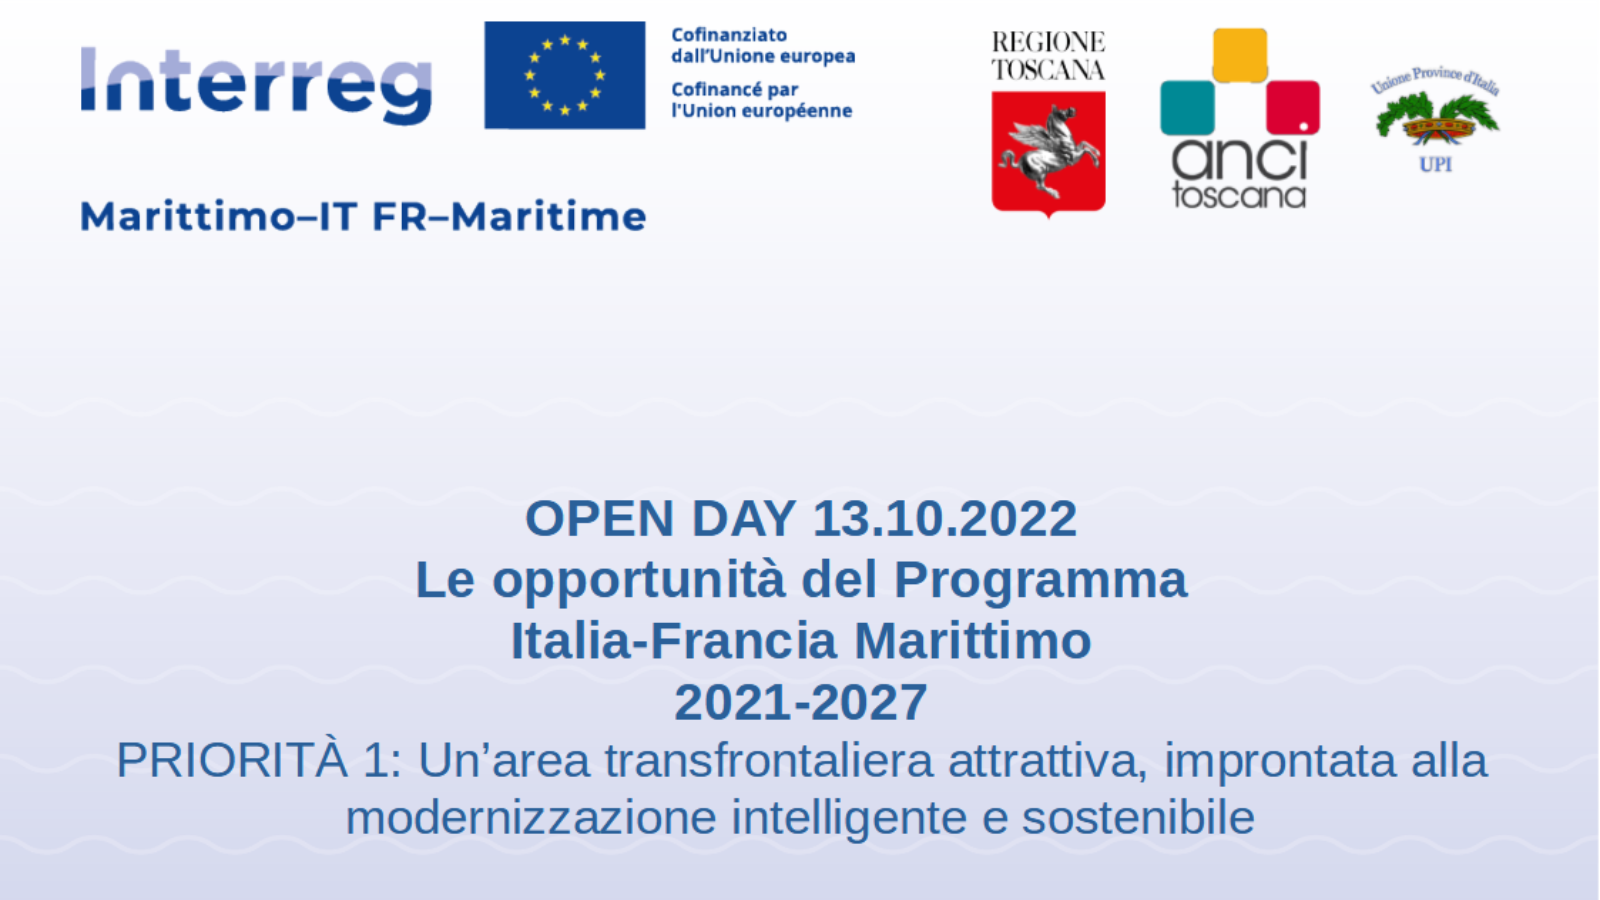 OPEN DAY 13.10.2022